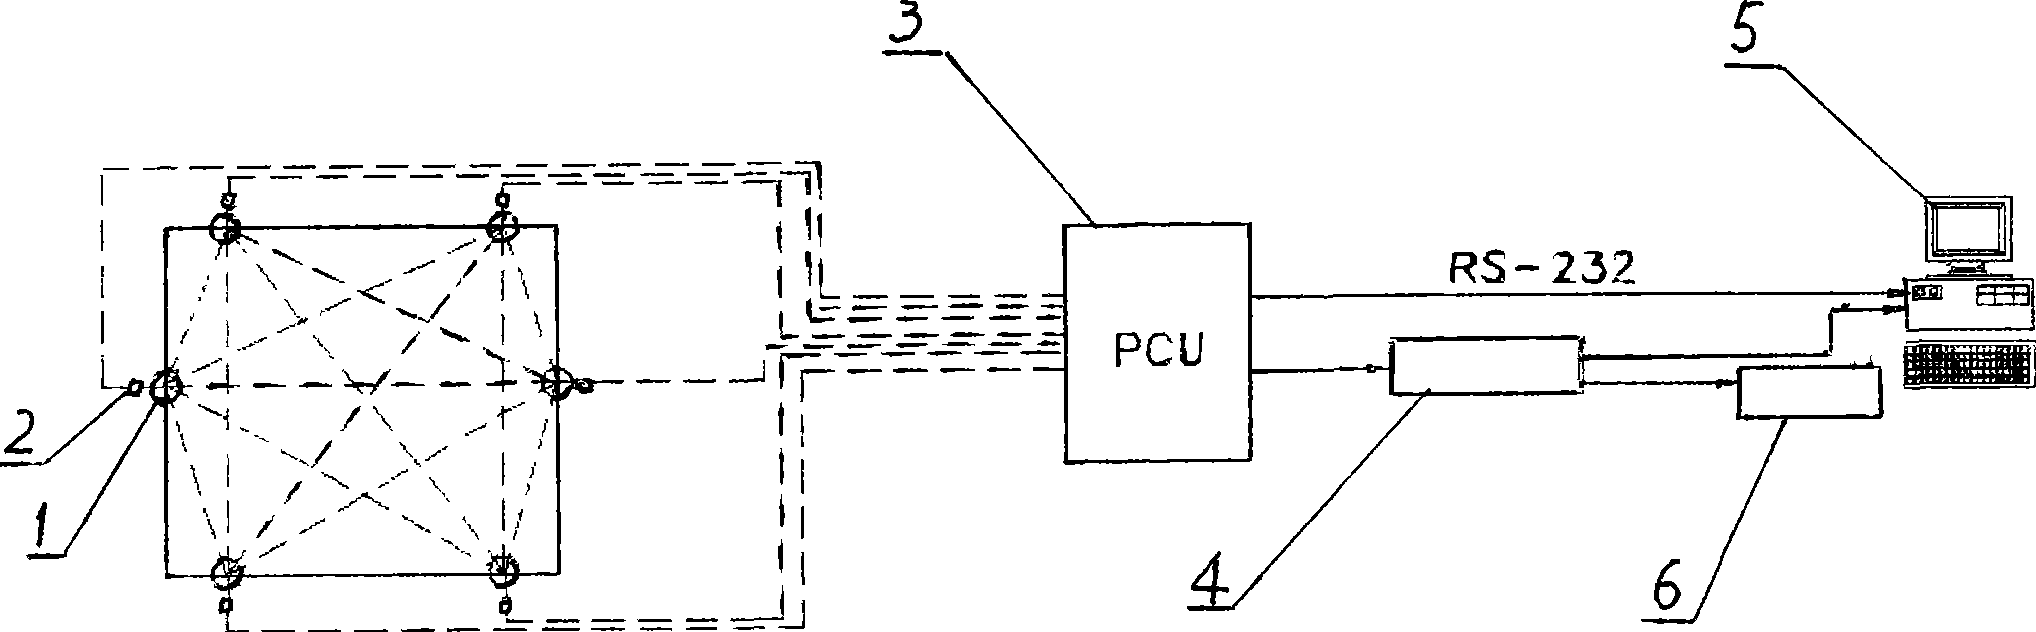 Intelligent ash blowing control system based on sound wave gas temperature field measuring technique